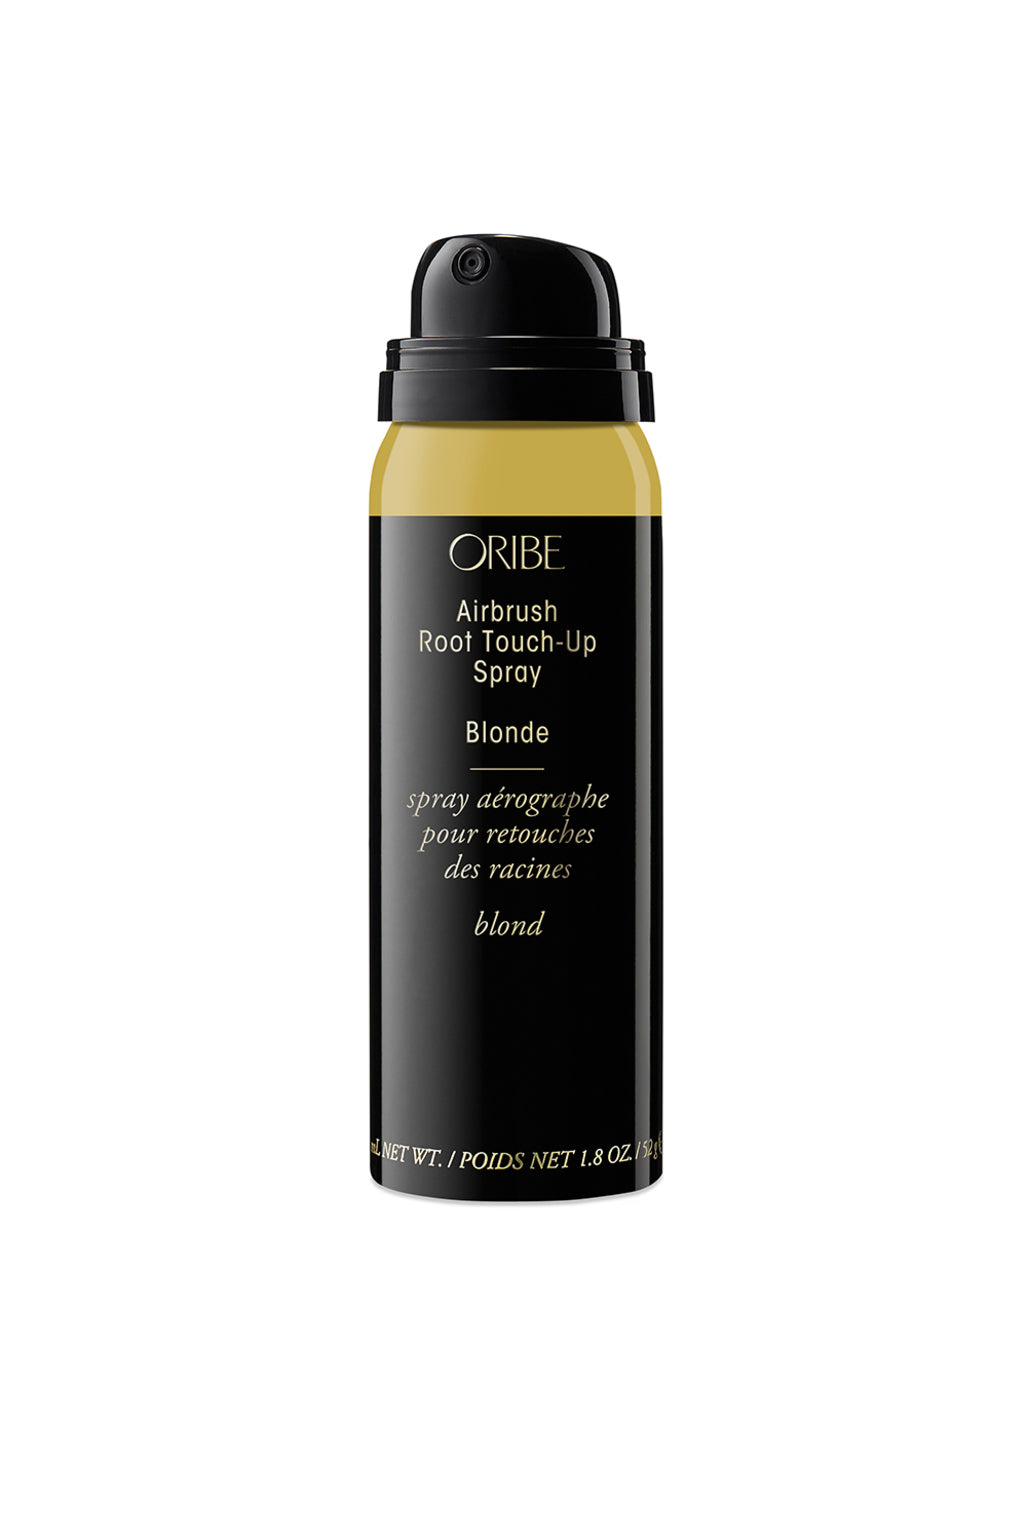 ORIBE Airbrush Root Touch-Up Spray (75mL)